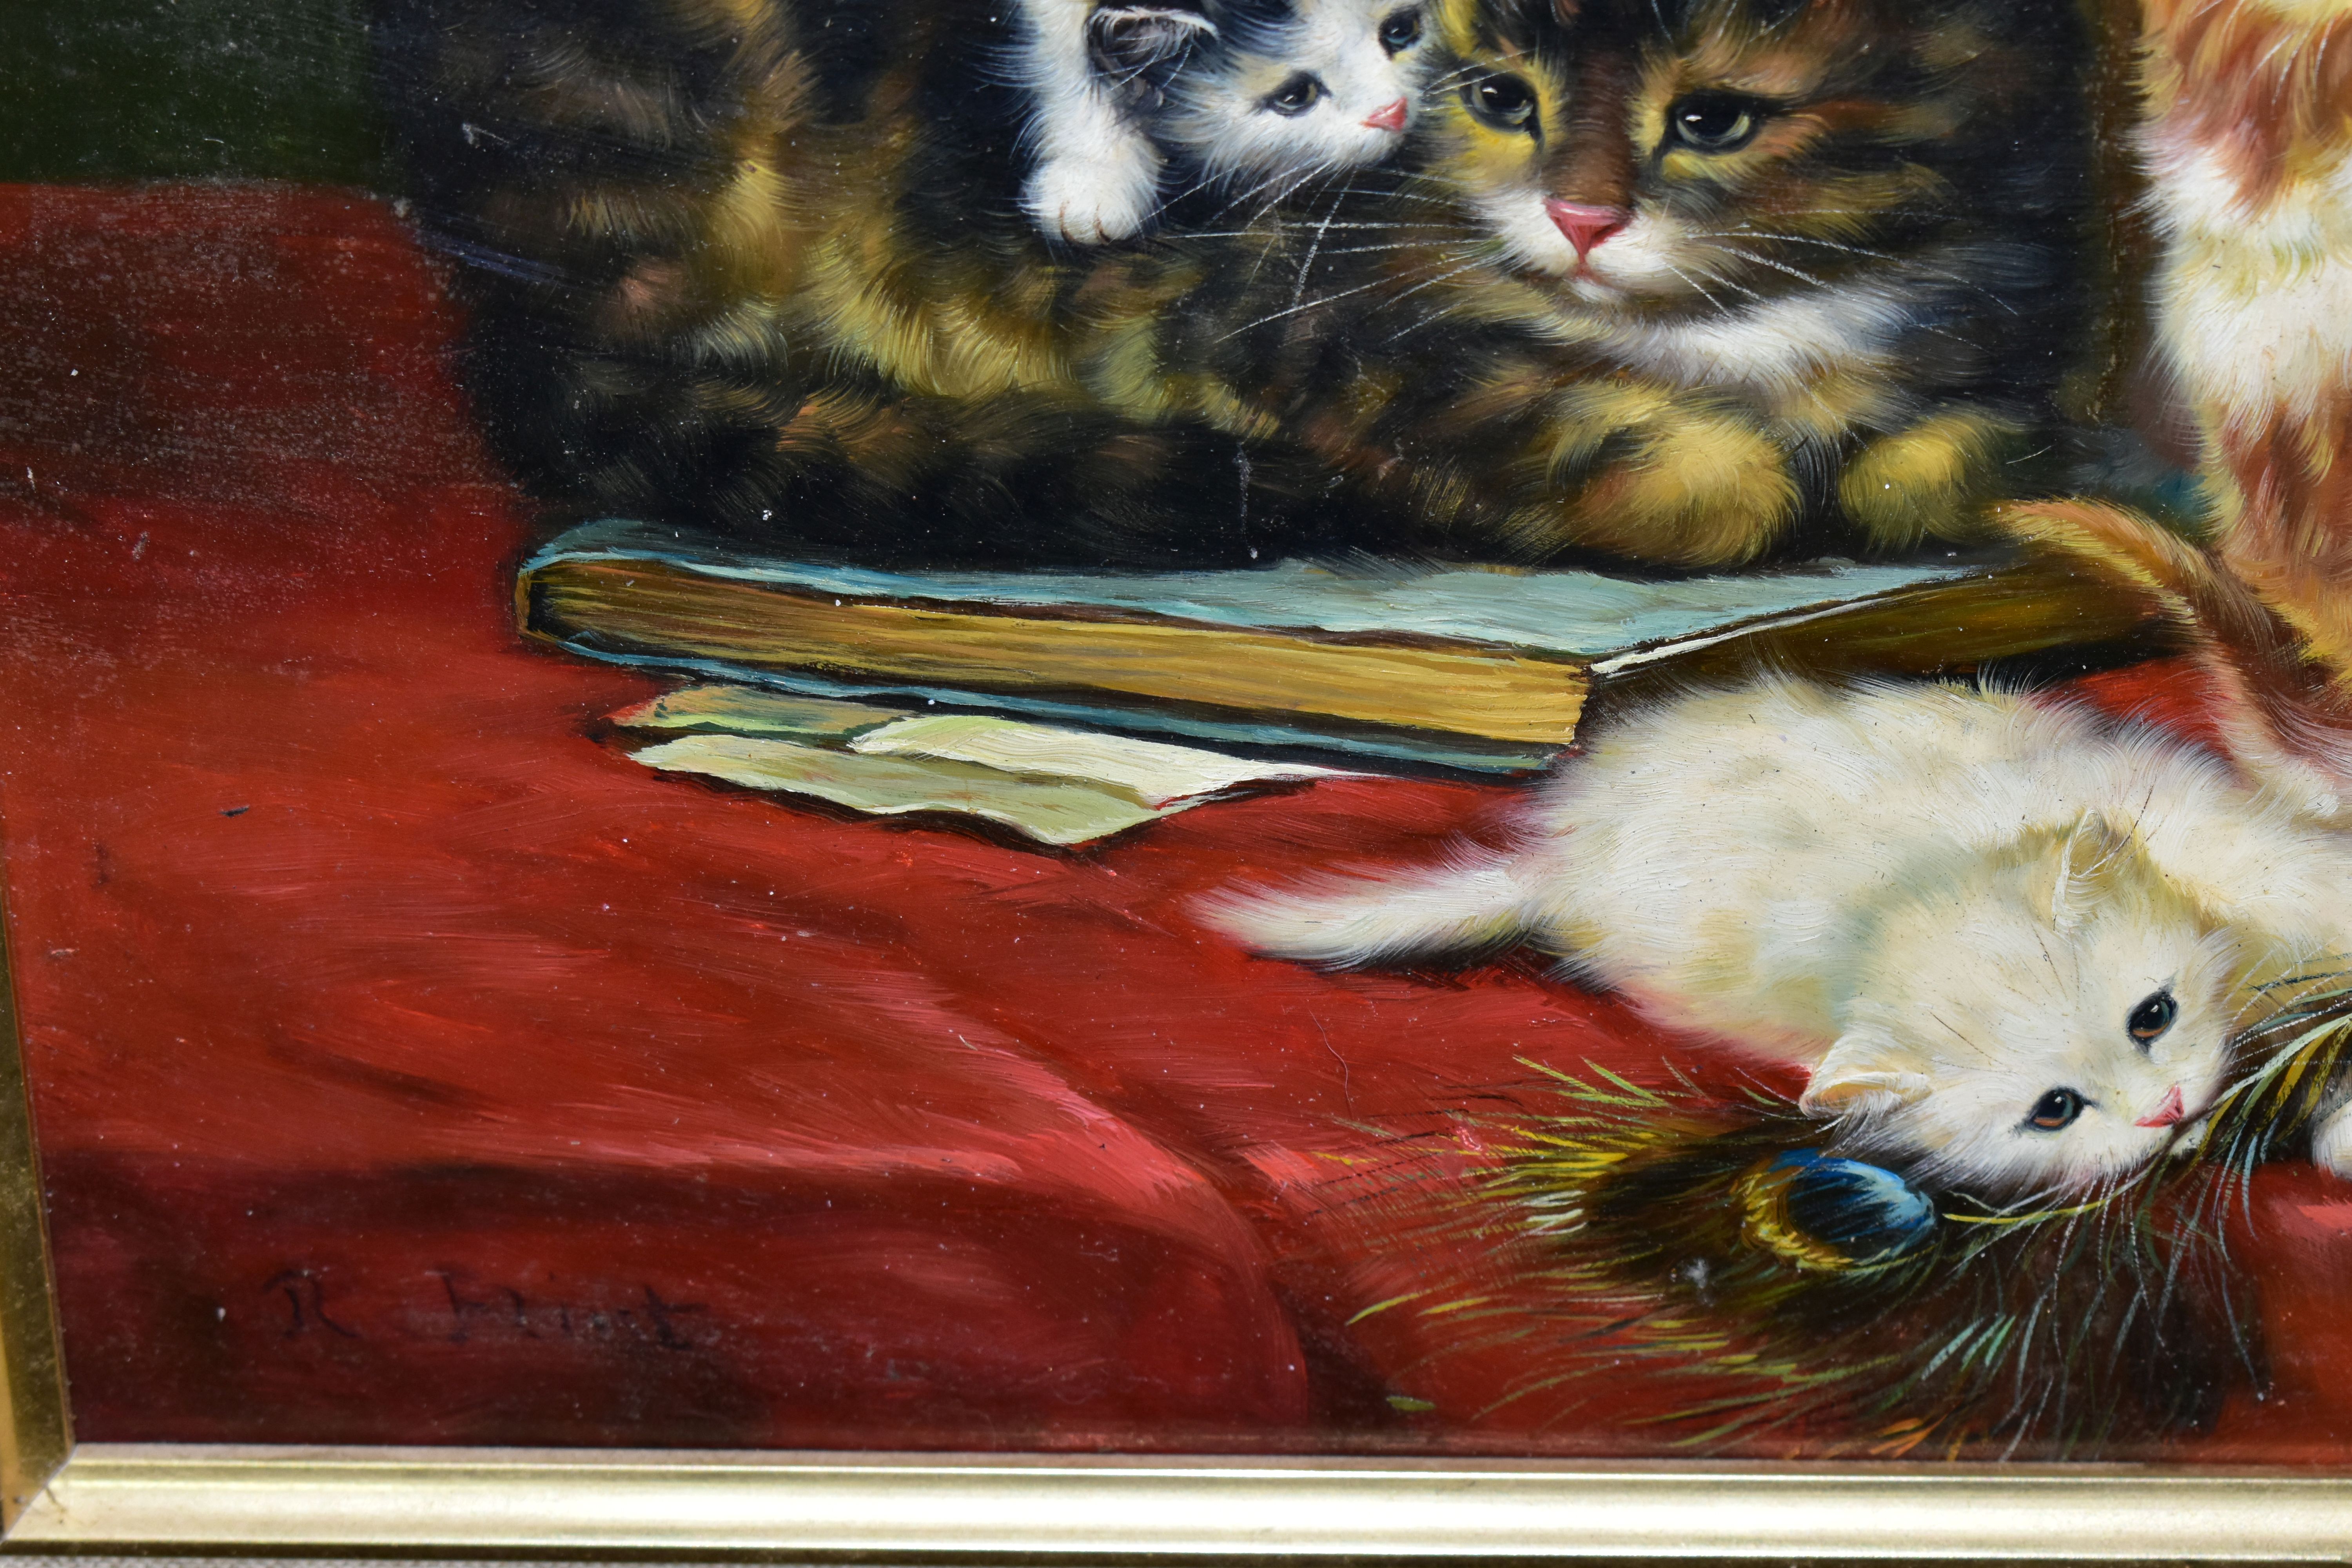 R. FLINT (20TH CENTURY) 'A CAT WITH KITTENS AT PLAY', signed bottom left, oil on wooden panel, - Image 3 of 4